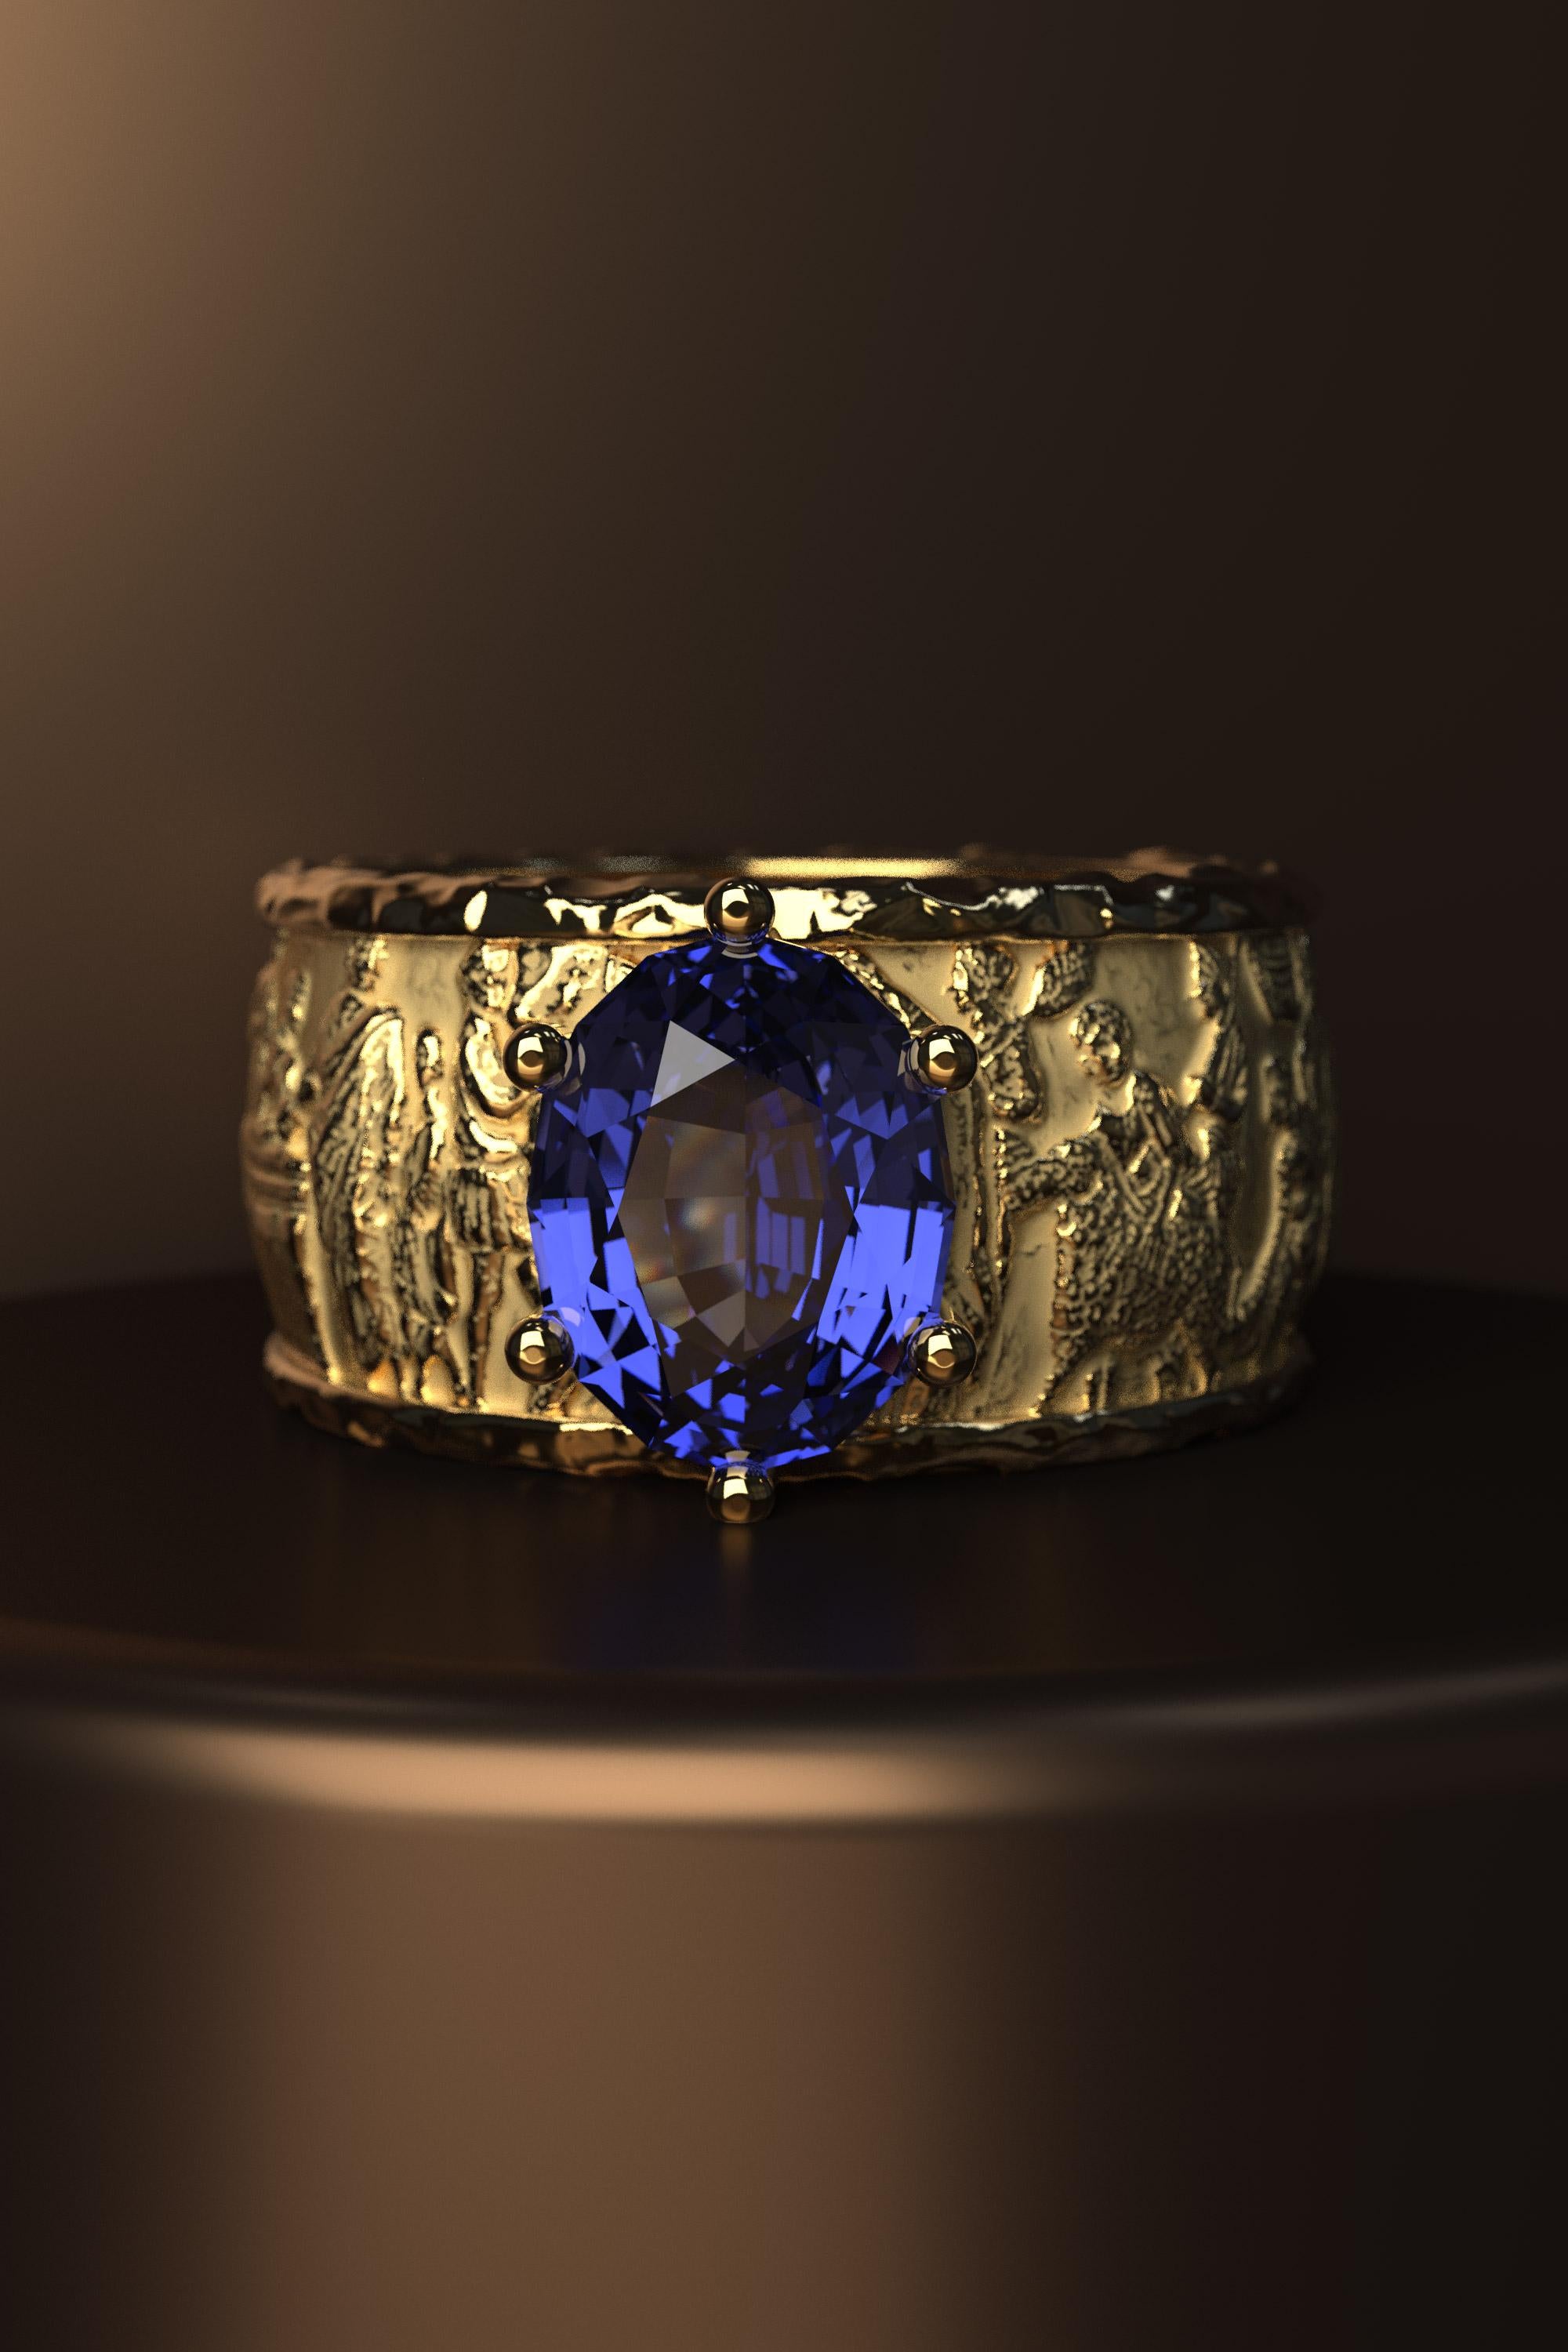 For Sale:  Tanzanite gold ring in 18k solid gold by Oltremare Gioielli made in Italy. 5